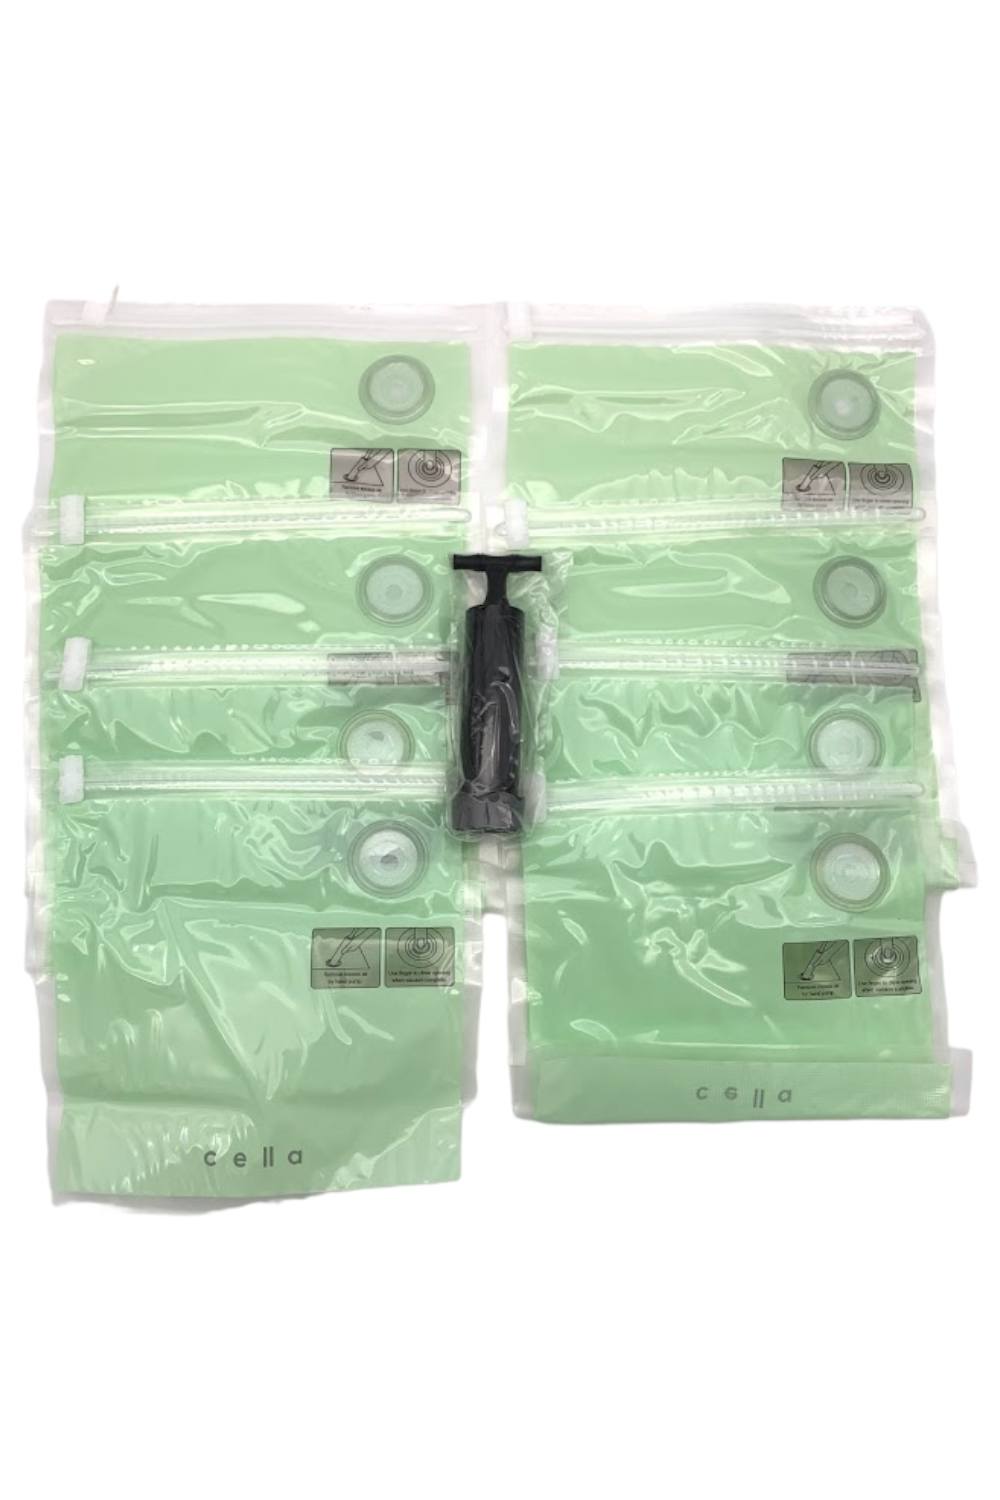 c e ll a 8-pc Reusable Vacuum Seal Antimicrobial Storage Bags